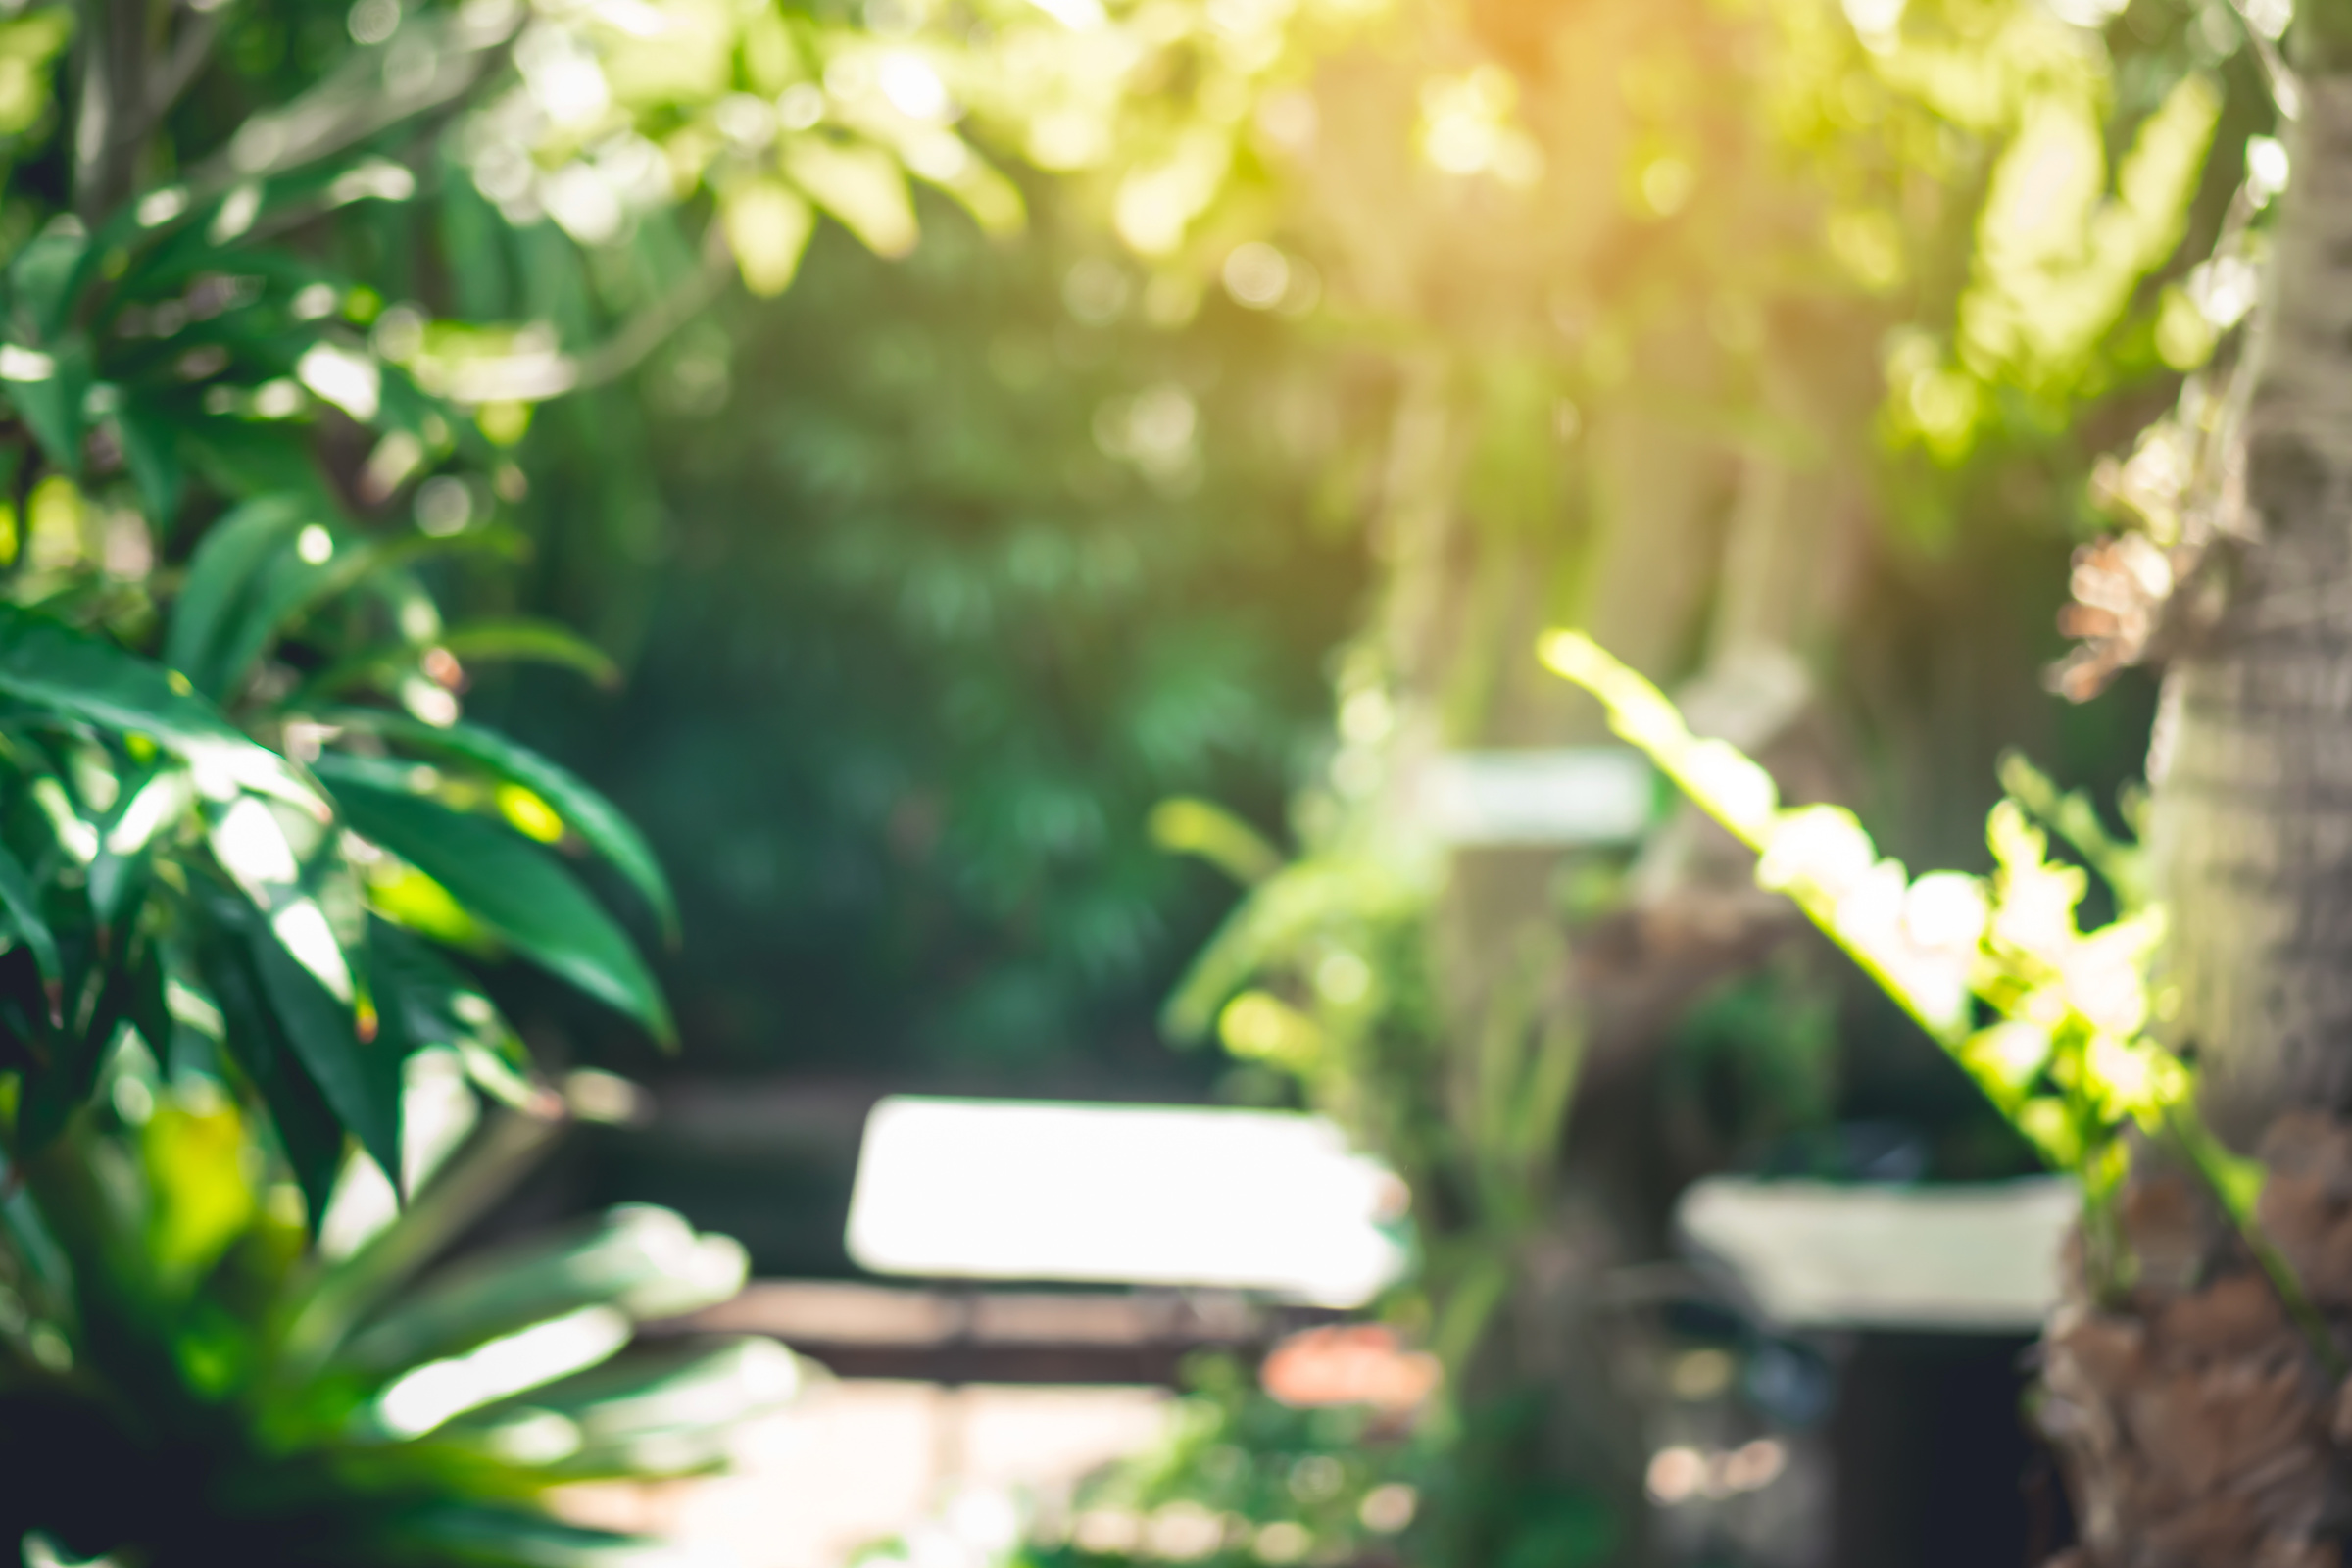 Blur garden cafe with green nature bokeh background